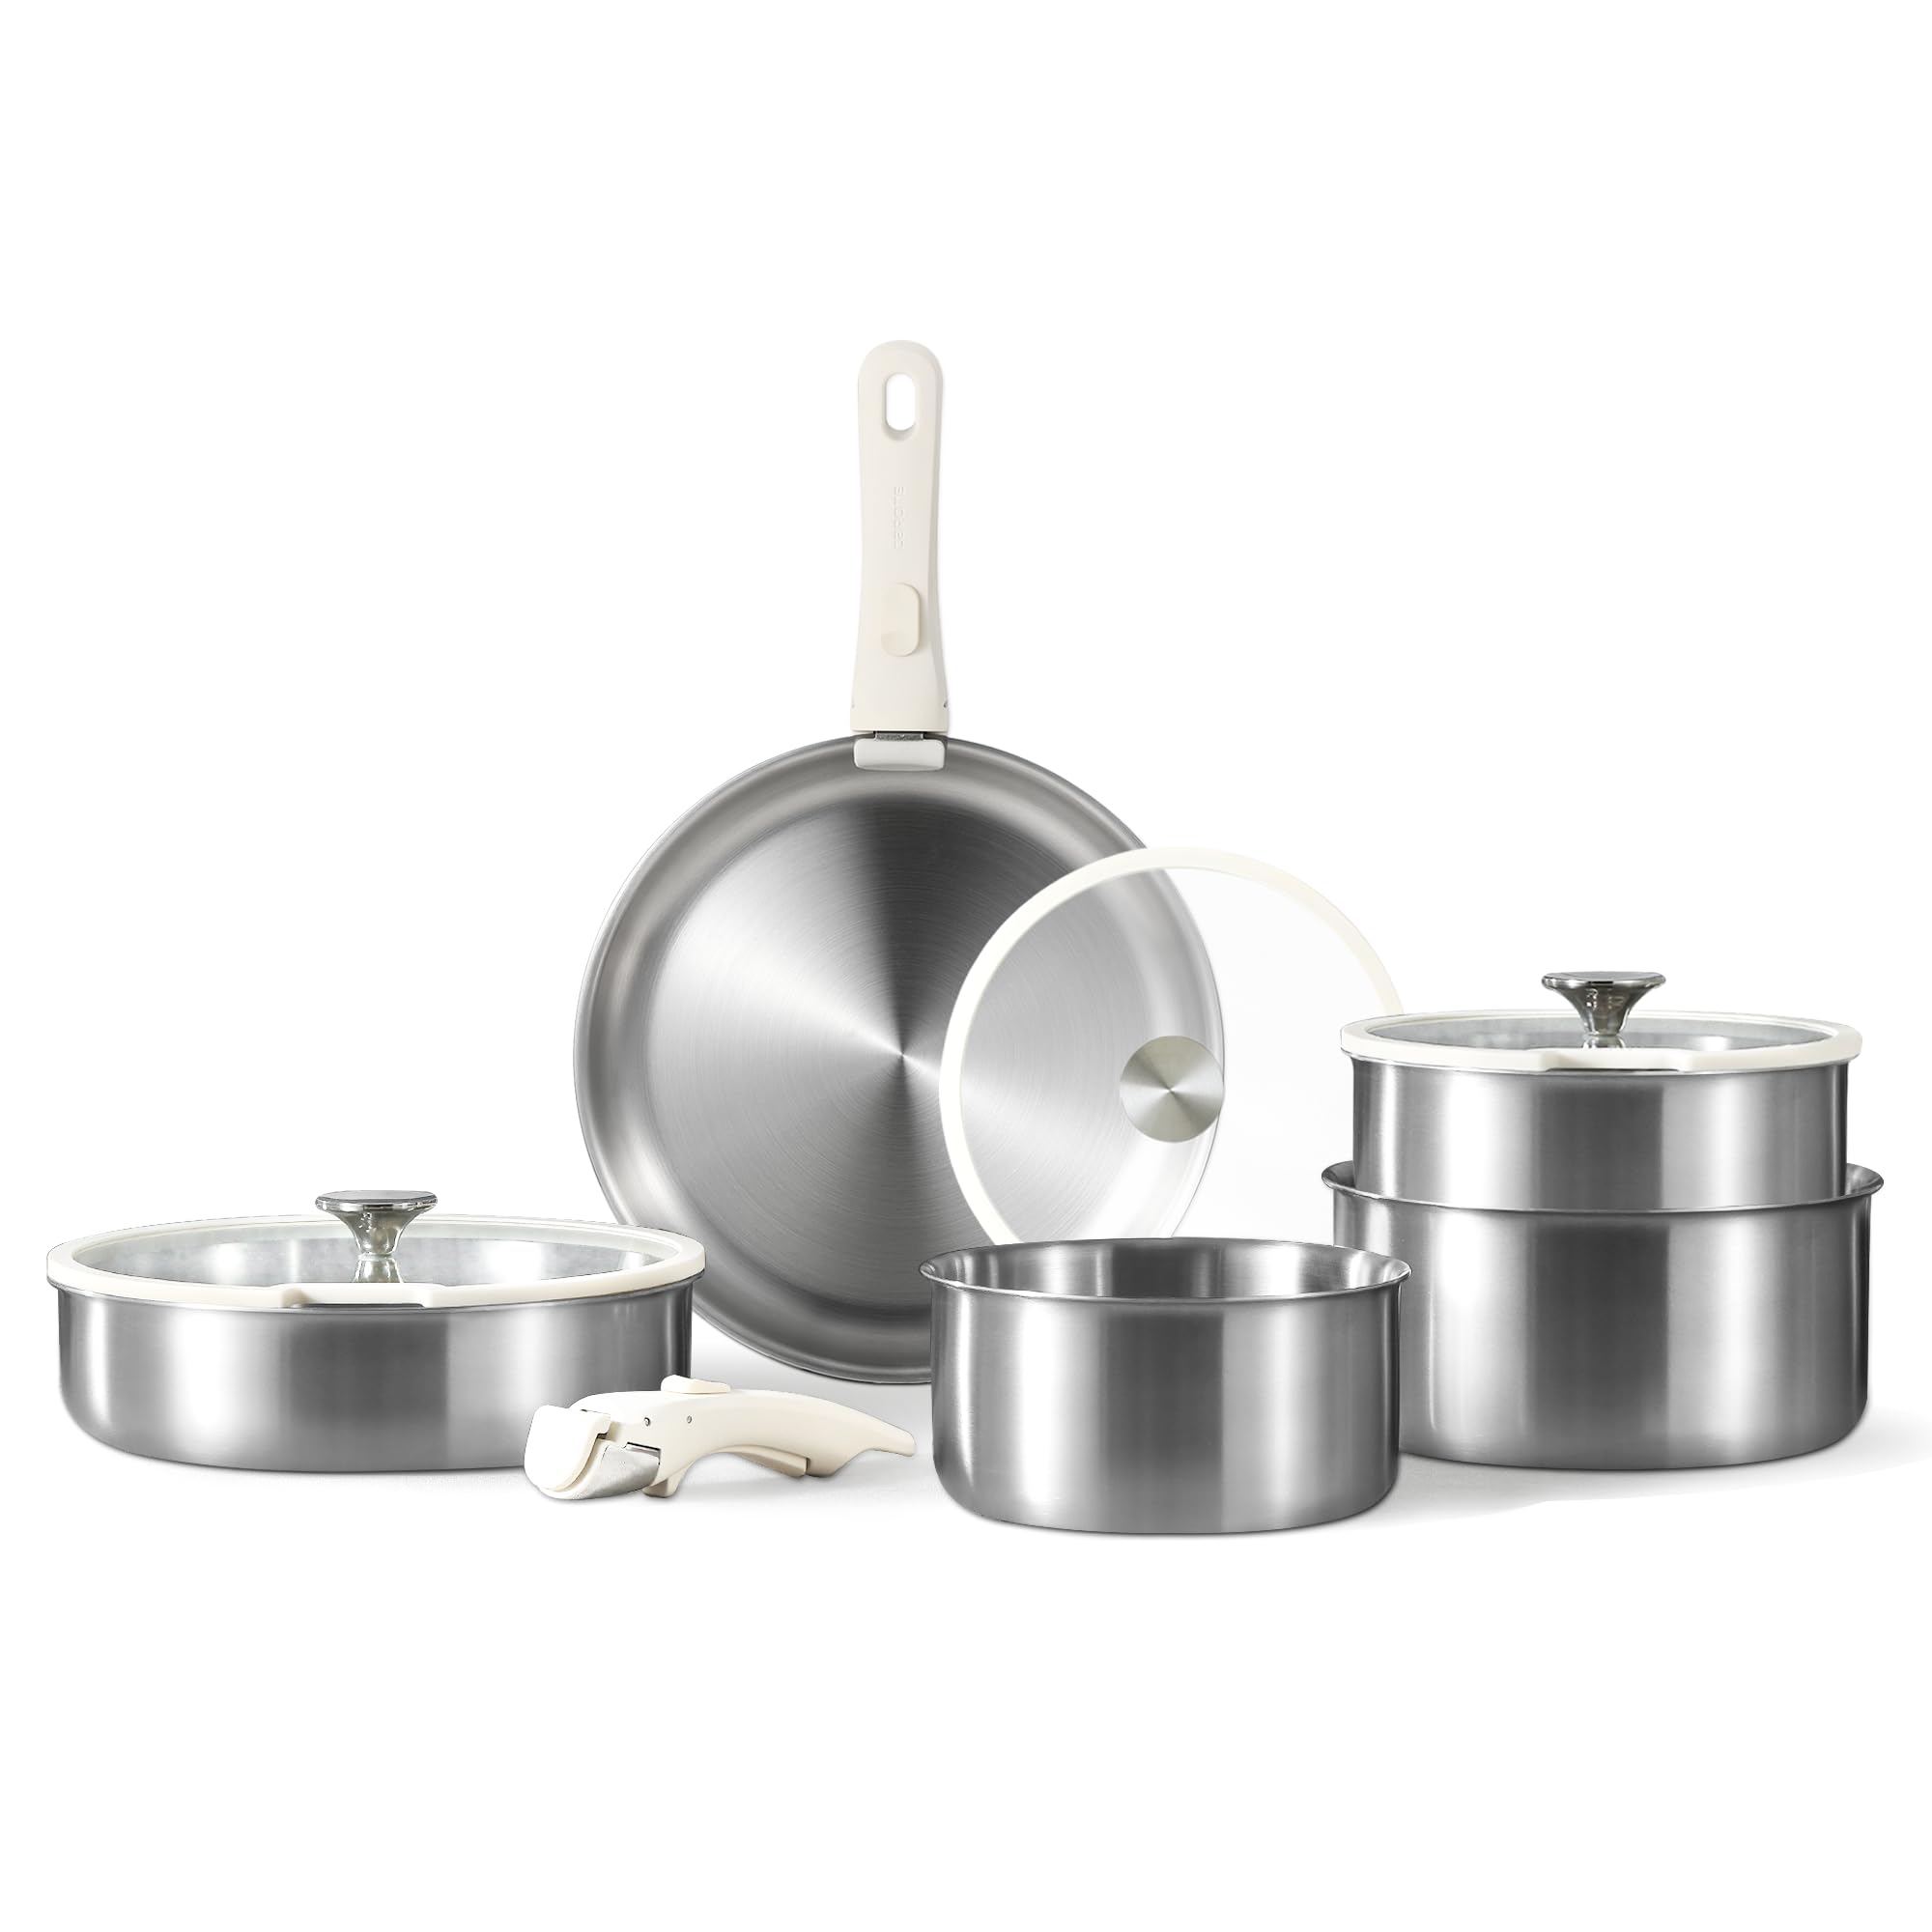 CAROTE 10pcs Pots and Pans Set, Stainless Steel Cookware Set Detachable Handle, Induction Kitchen Cookware Sets with Removable Handle, Oven Safe, Stainless Steel $64.98